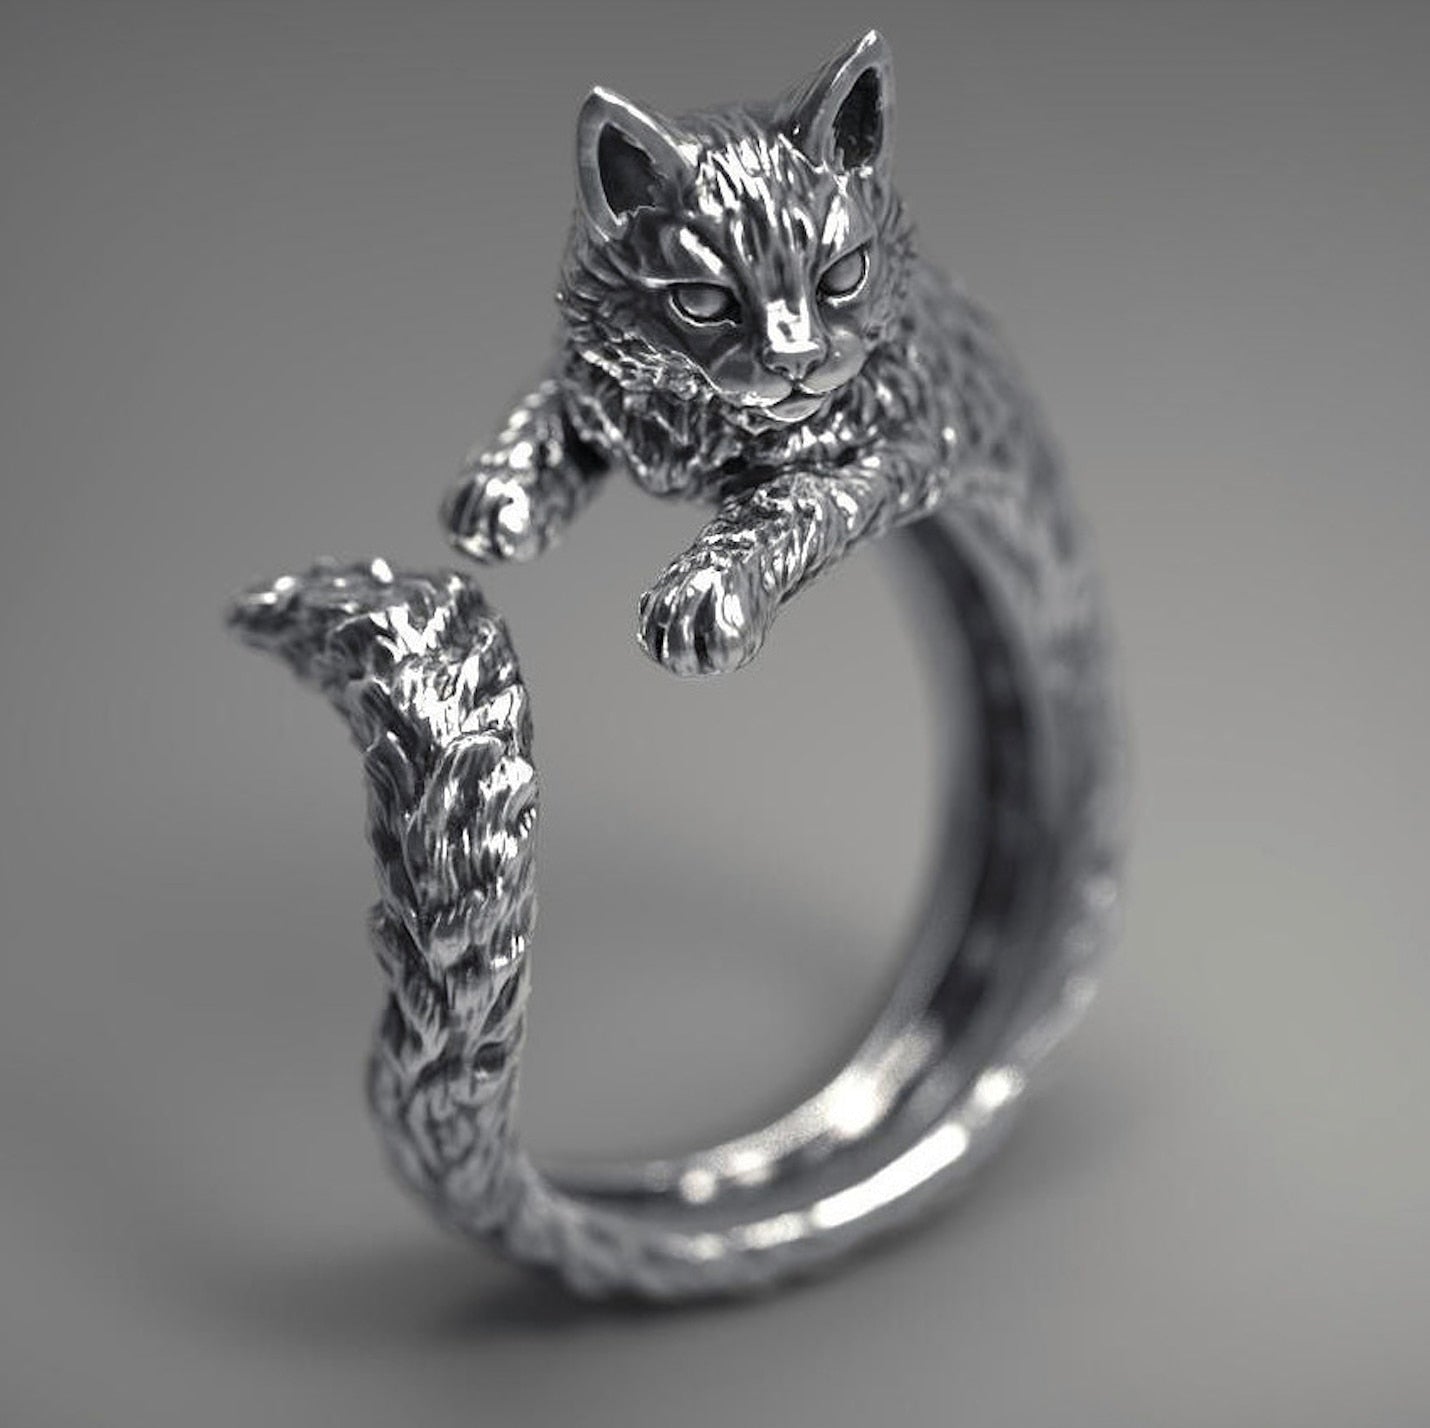 Vintage Ring Tail Cats - cat rings